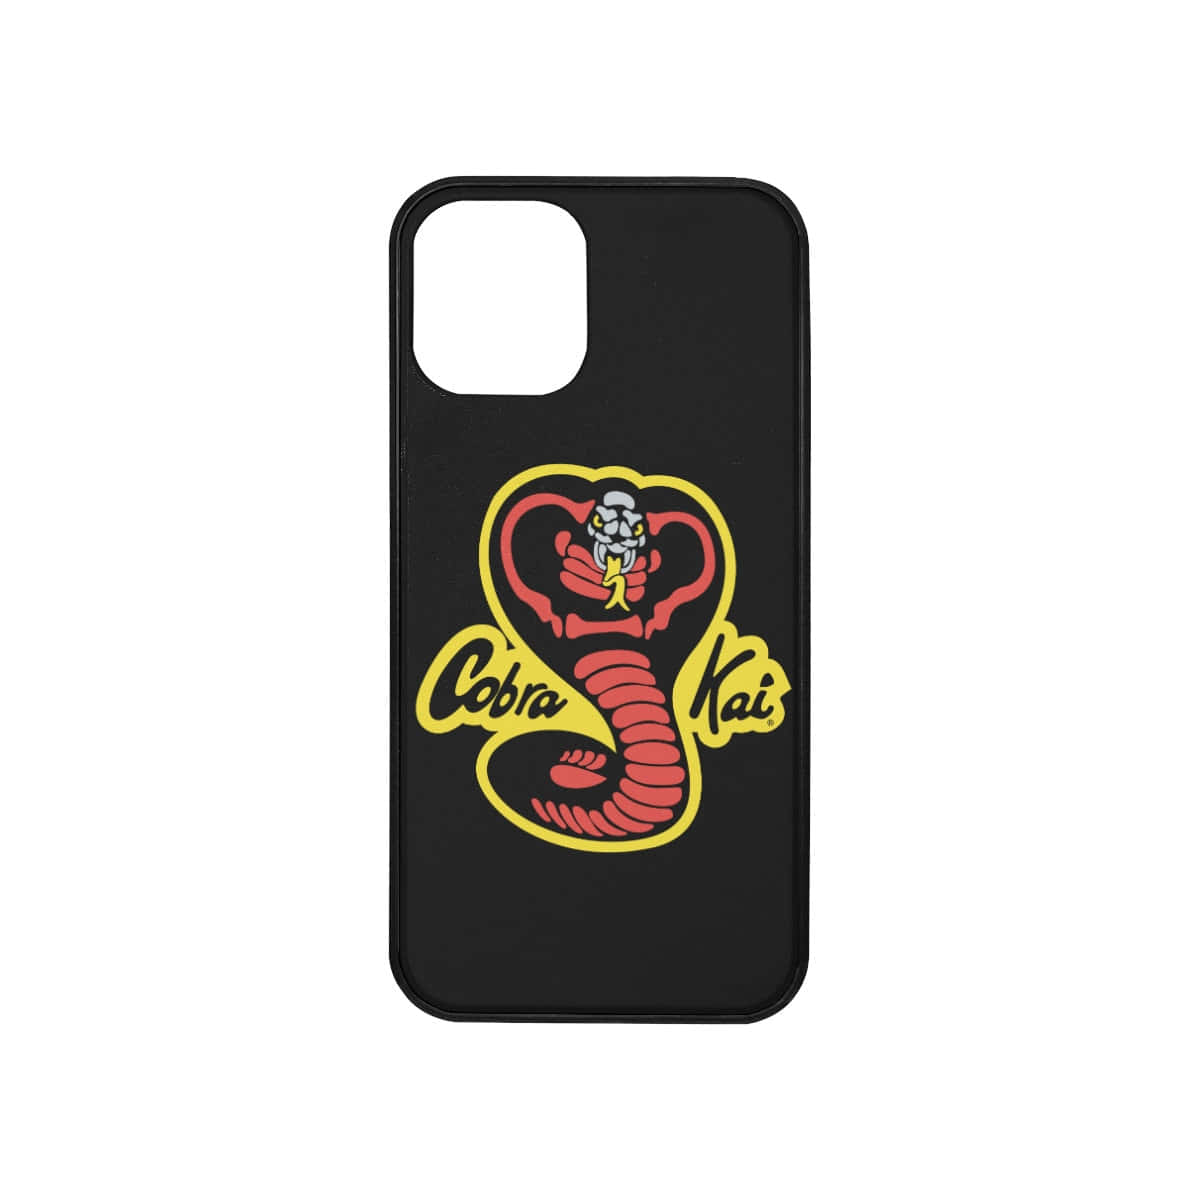 Show Your Support for the Cobra Kai Dojo by using this Awesome iPhone XR Wallpaper